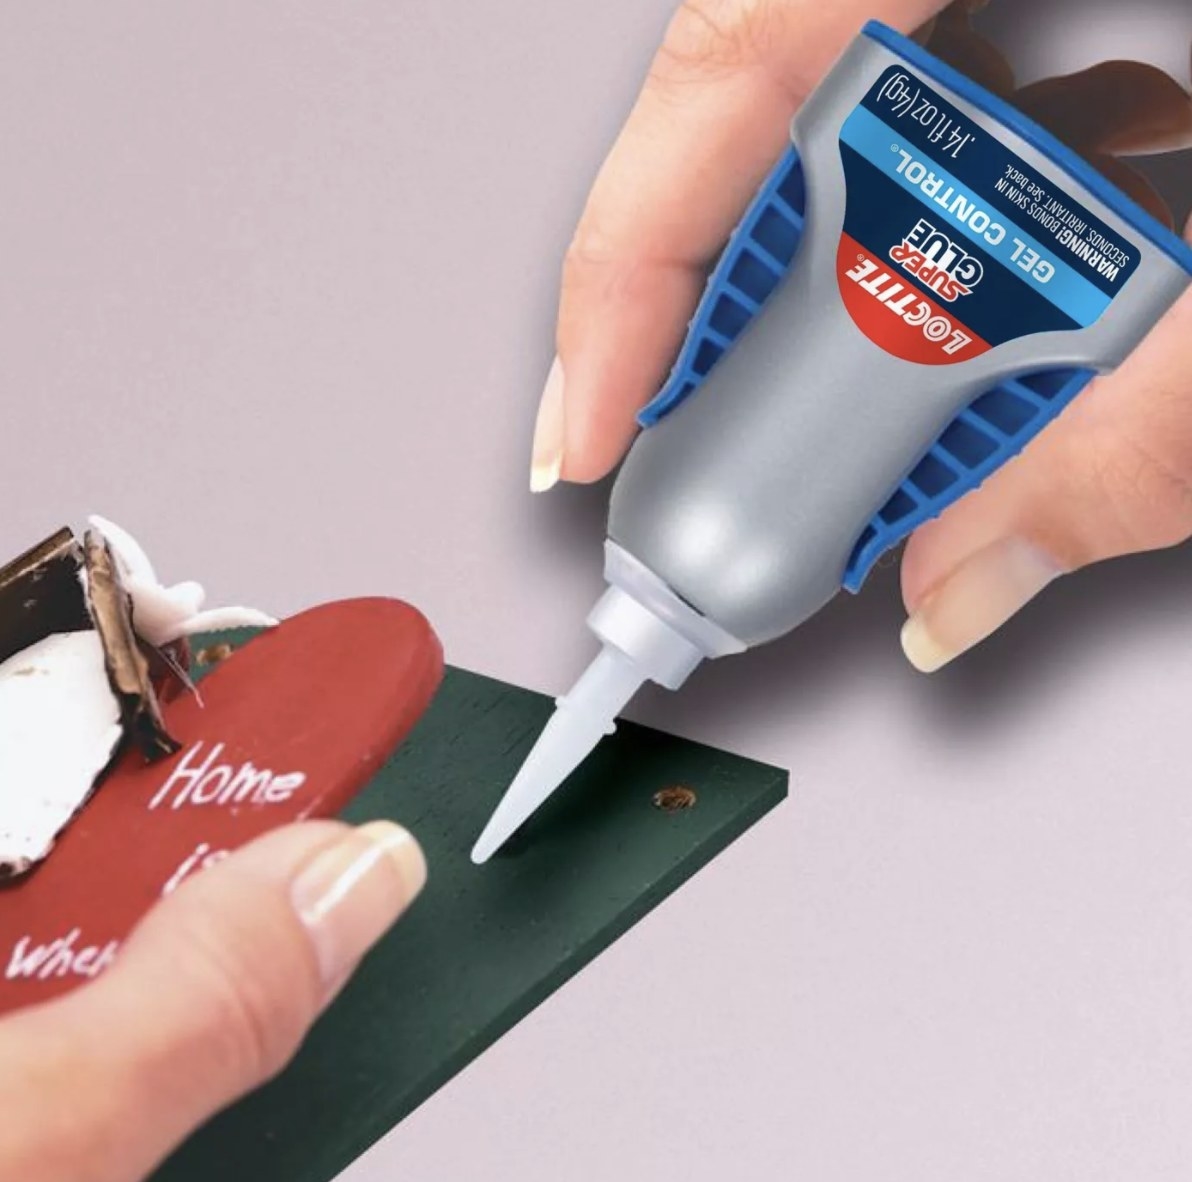 The grey and blue bottle of glue that says &quot;LOCTITE&quot; &quot;SUPER GLUE&quot; and &quot;GEL CONTROL&quot; is gluing a green and red home decoration back together that has the words &quot;Home is where&quot; visible